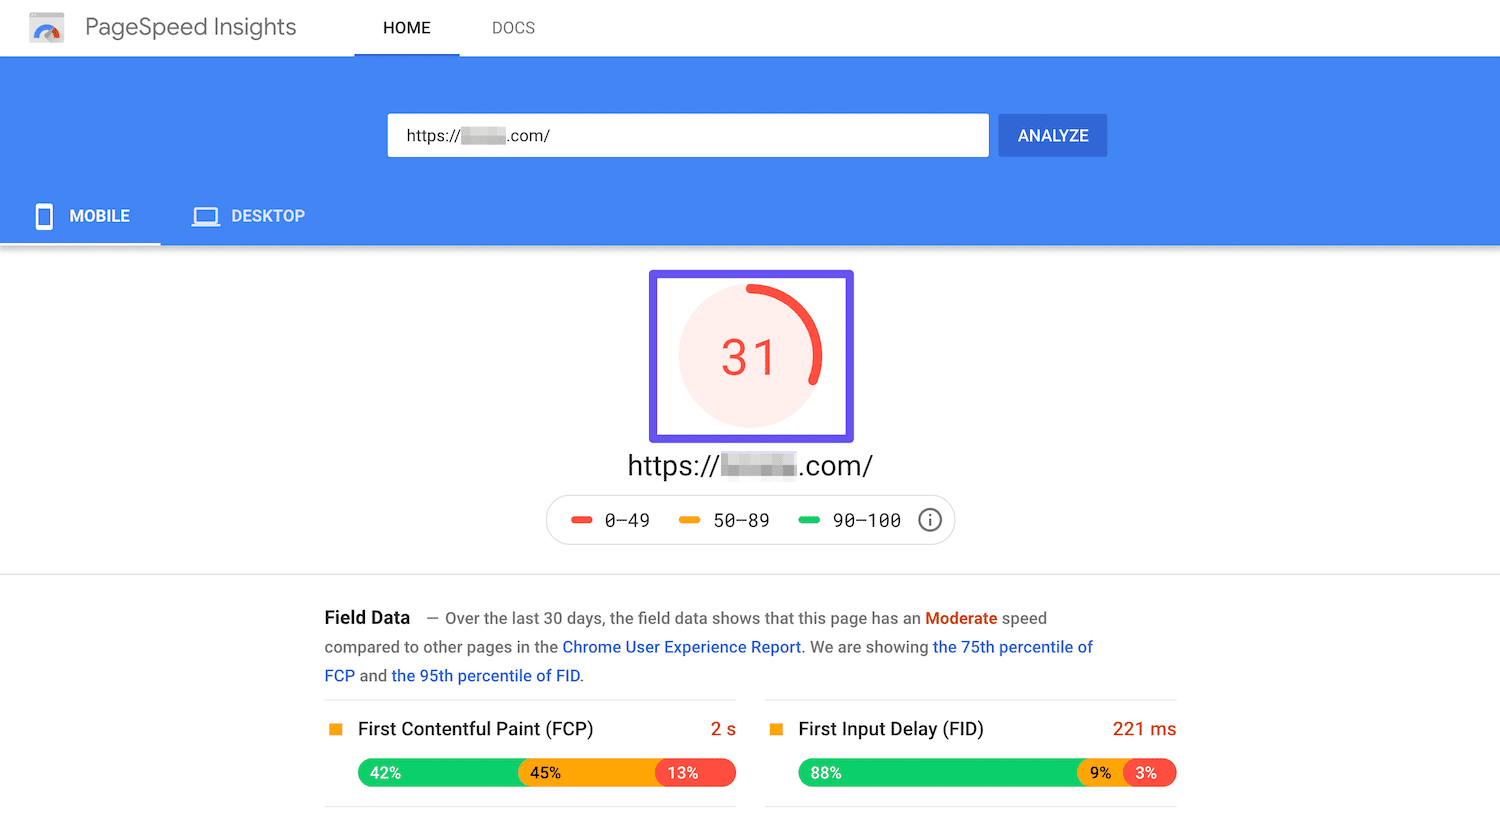 pagespeed-insights-score